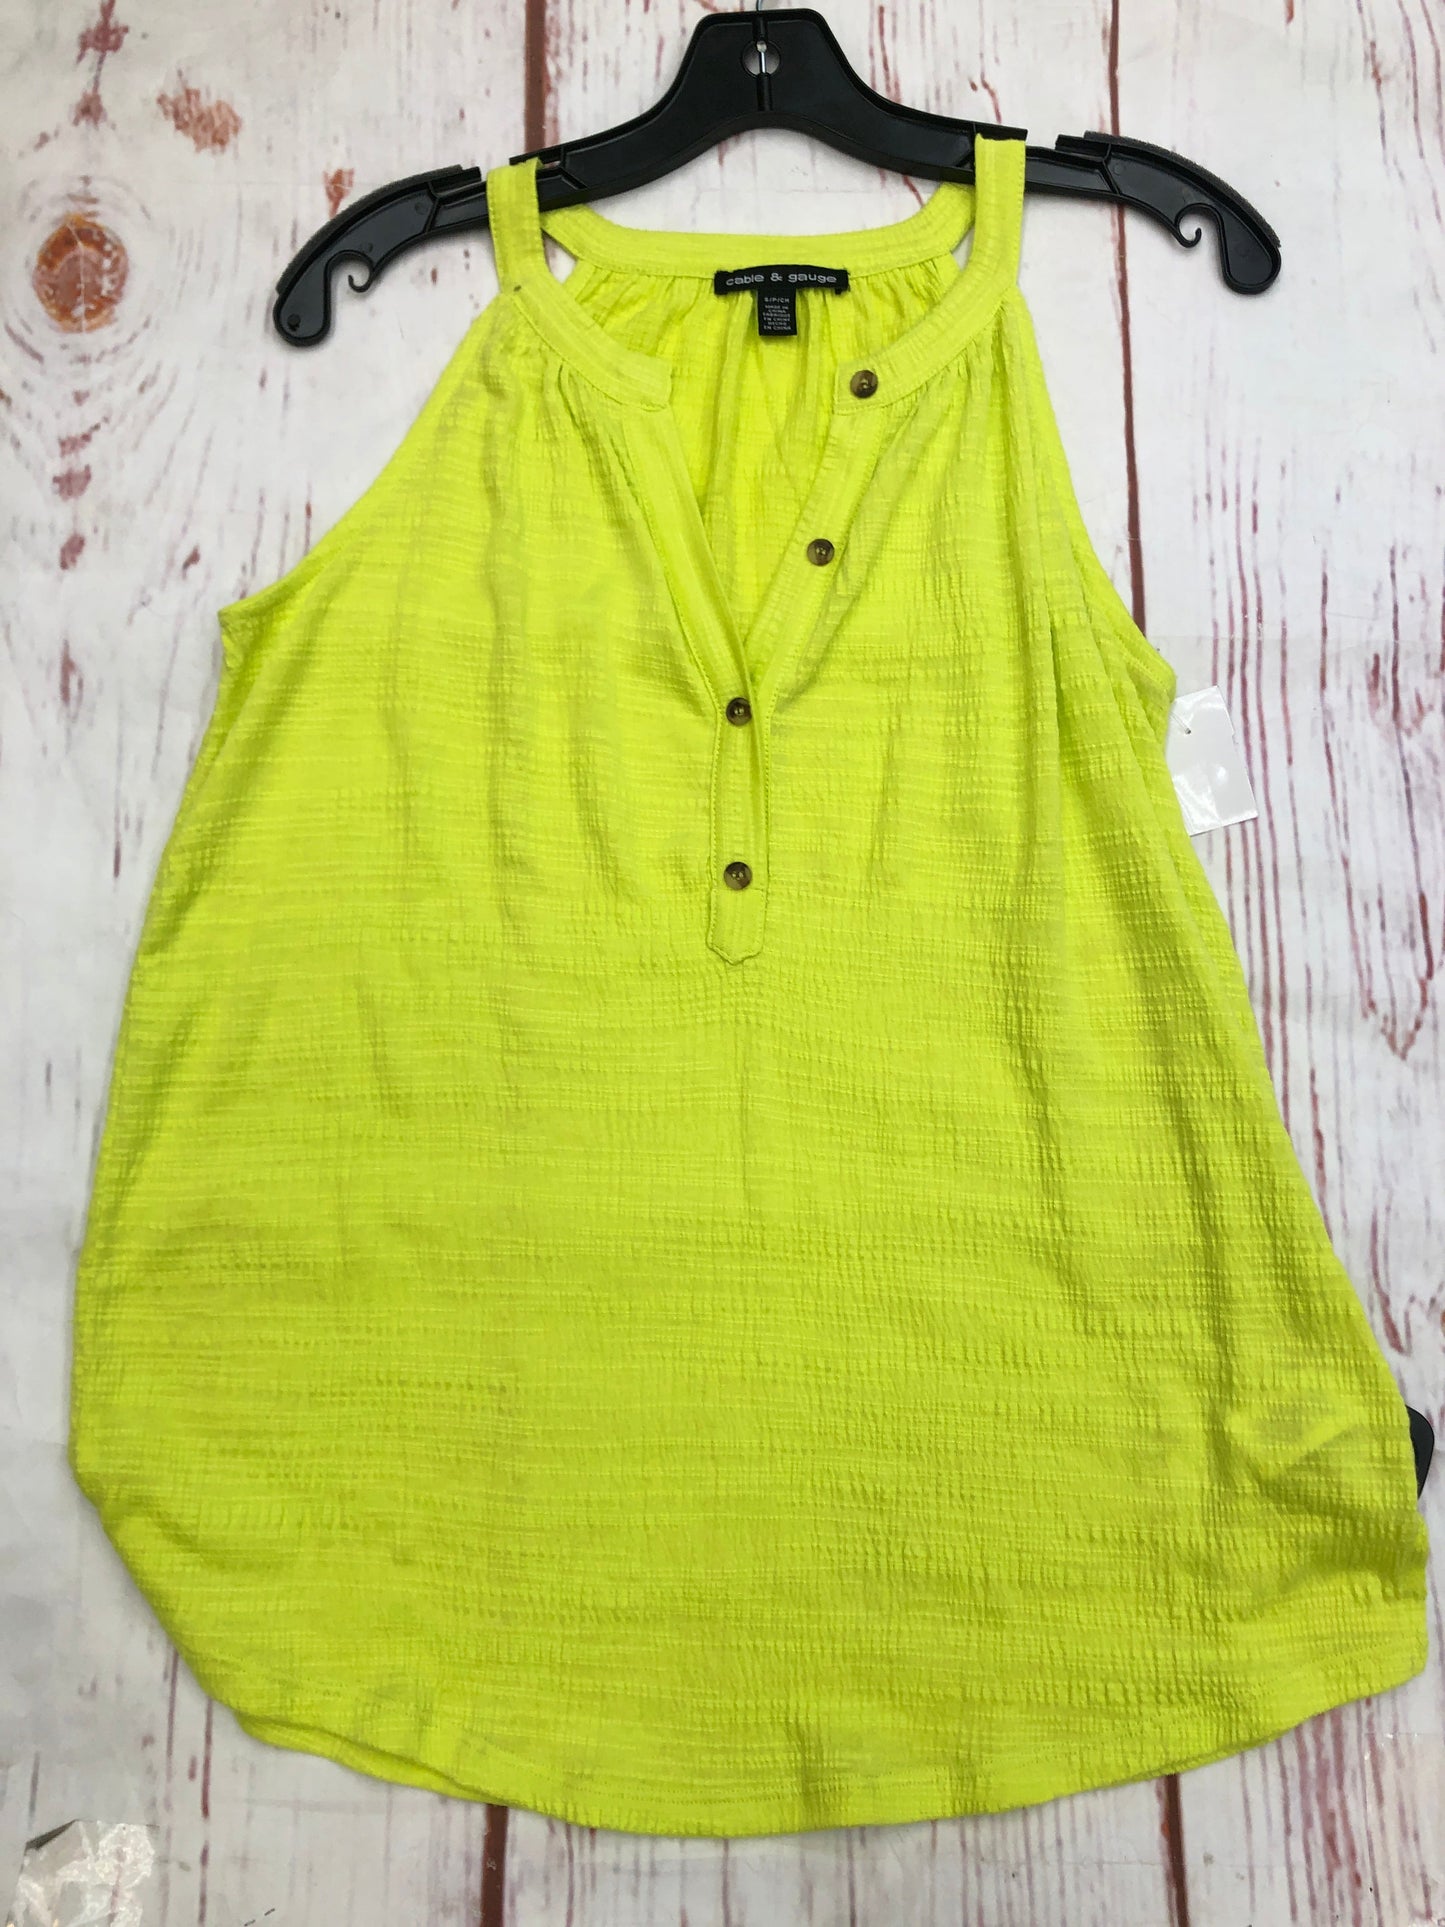 Top Sleeveless By Cable And Gauge  Size: S